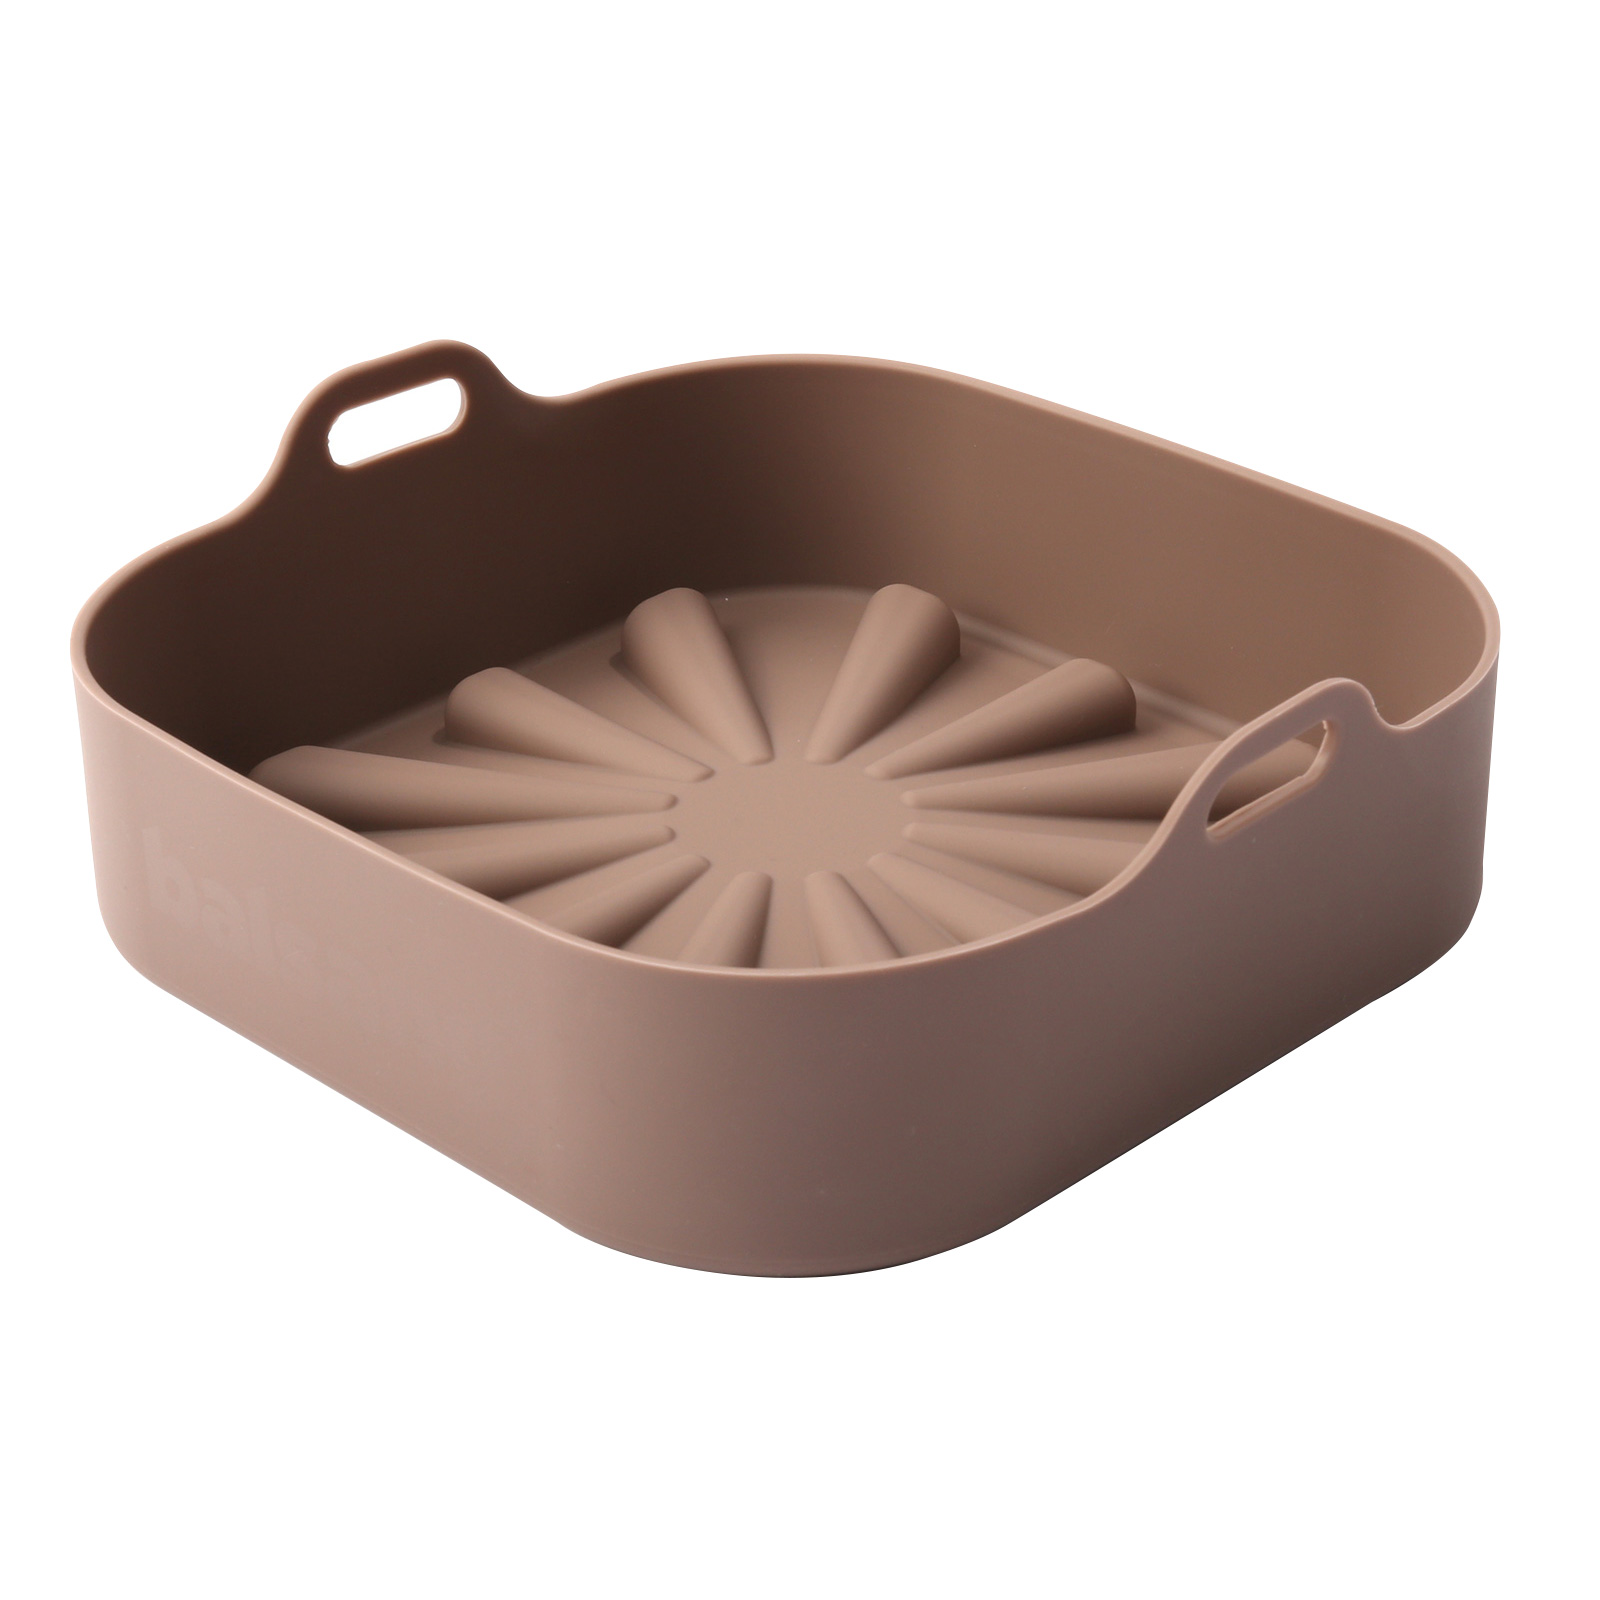 Airfryer Reusable Silicone Pot Square - CHOCOLATE